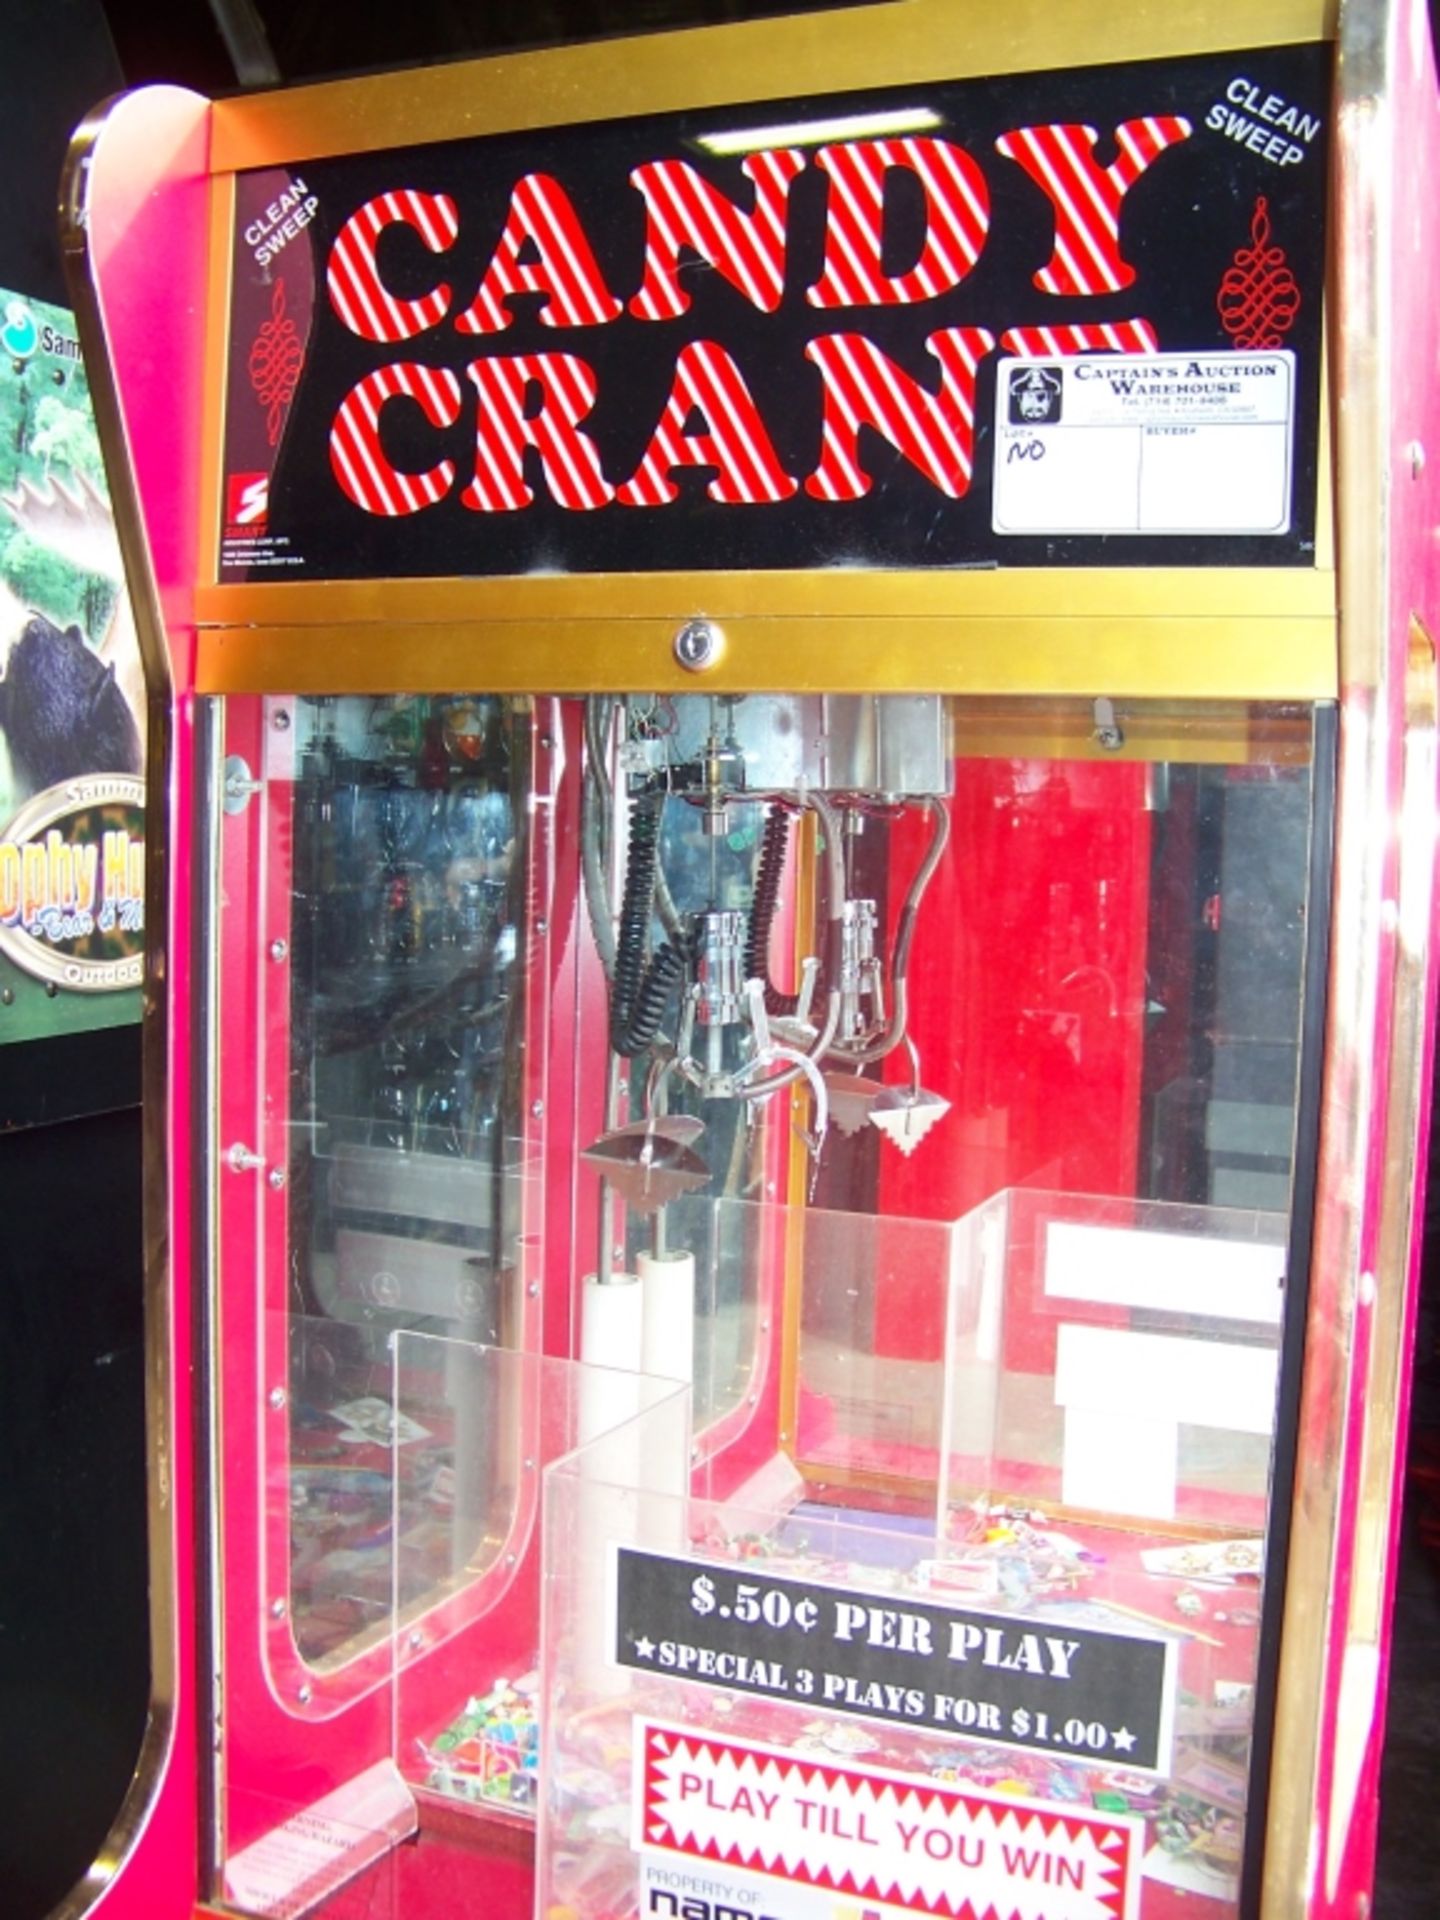 24" SMART CLEAN SWEEP CANDY CRANE MACHINE - Image 2 of 4